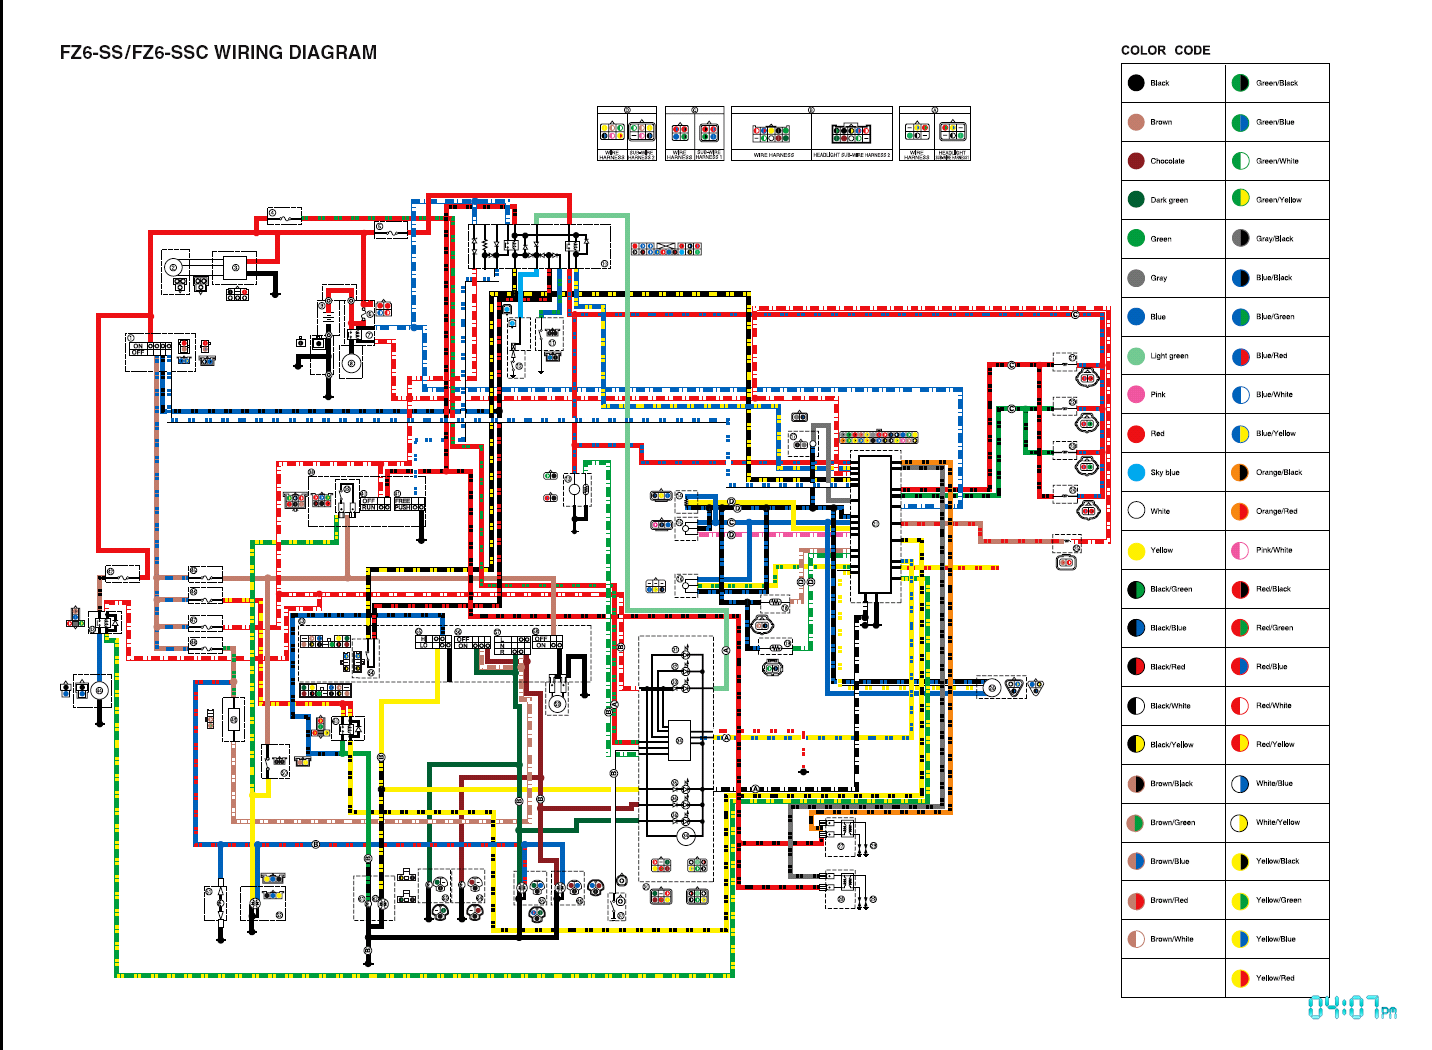 2002 Yamaha R6 Wiring Diagram from www.redtintop.com